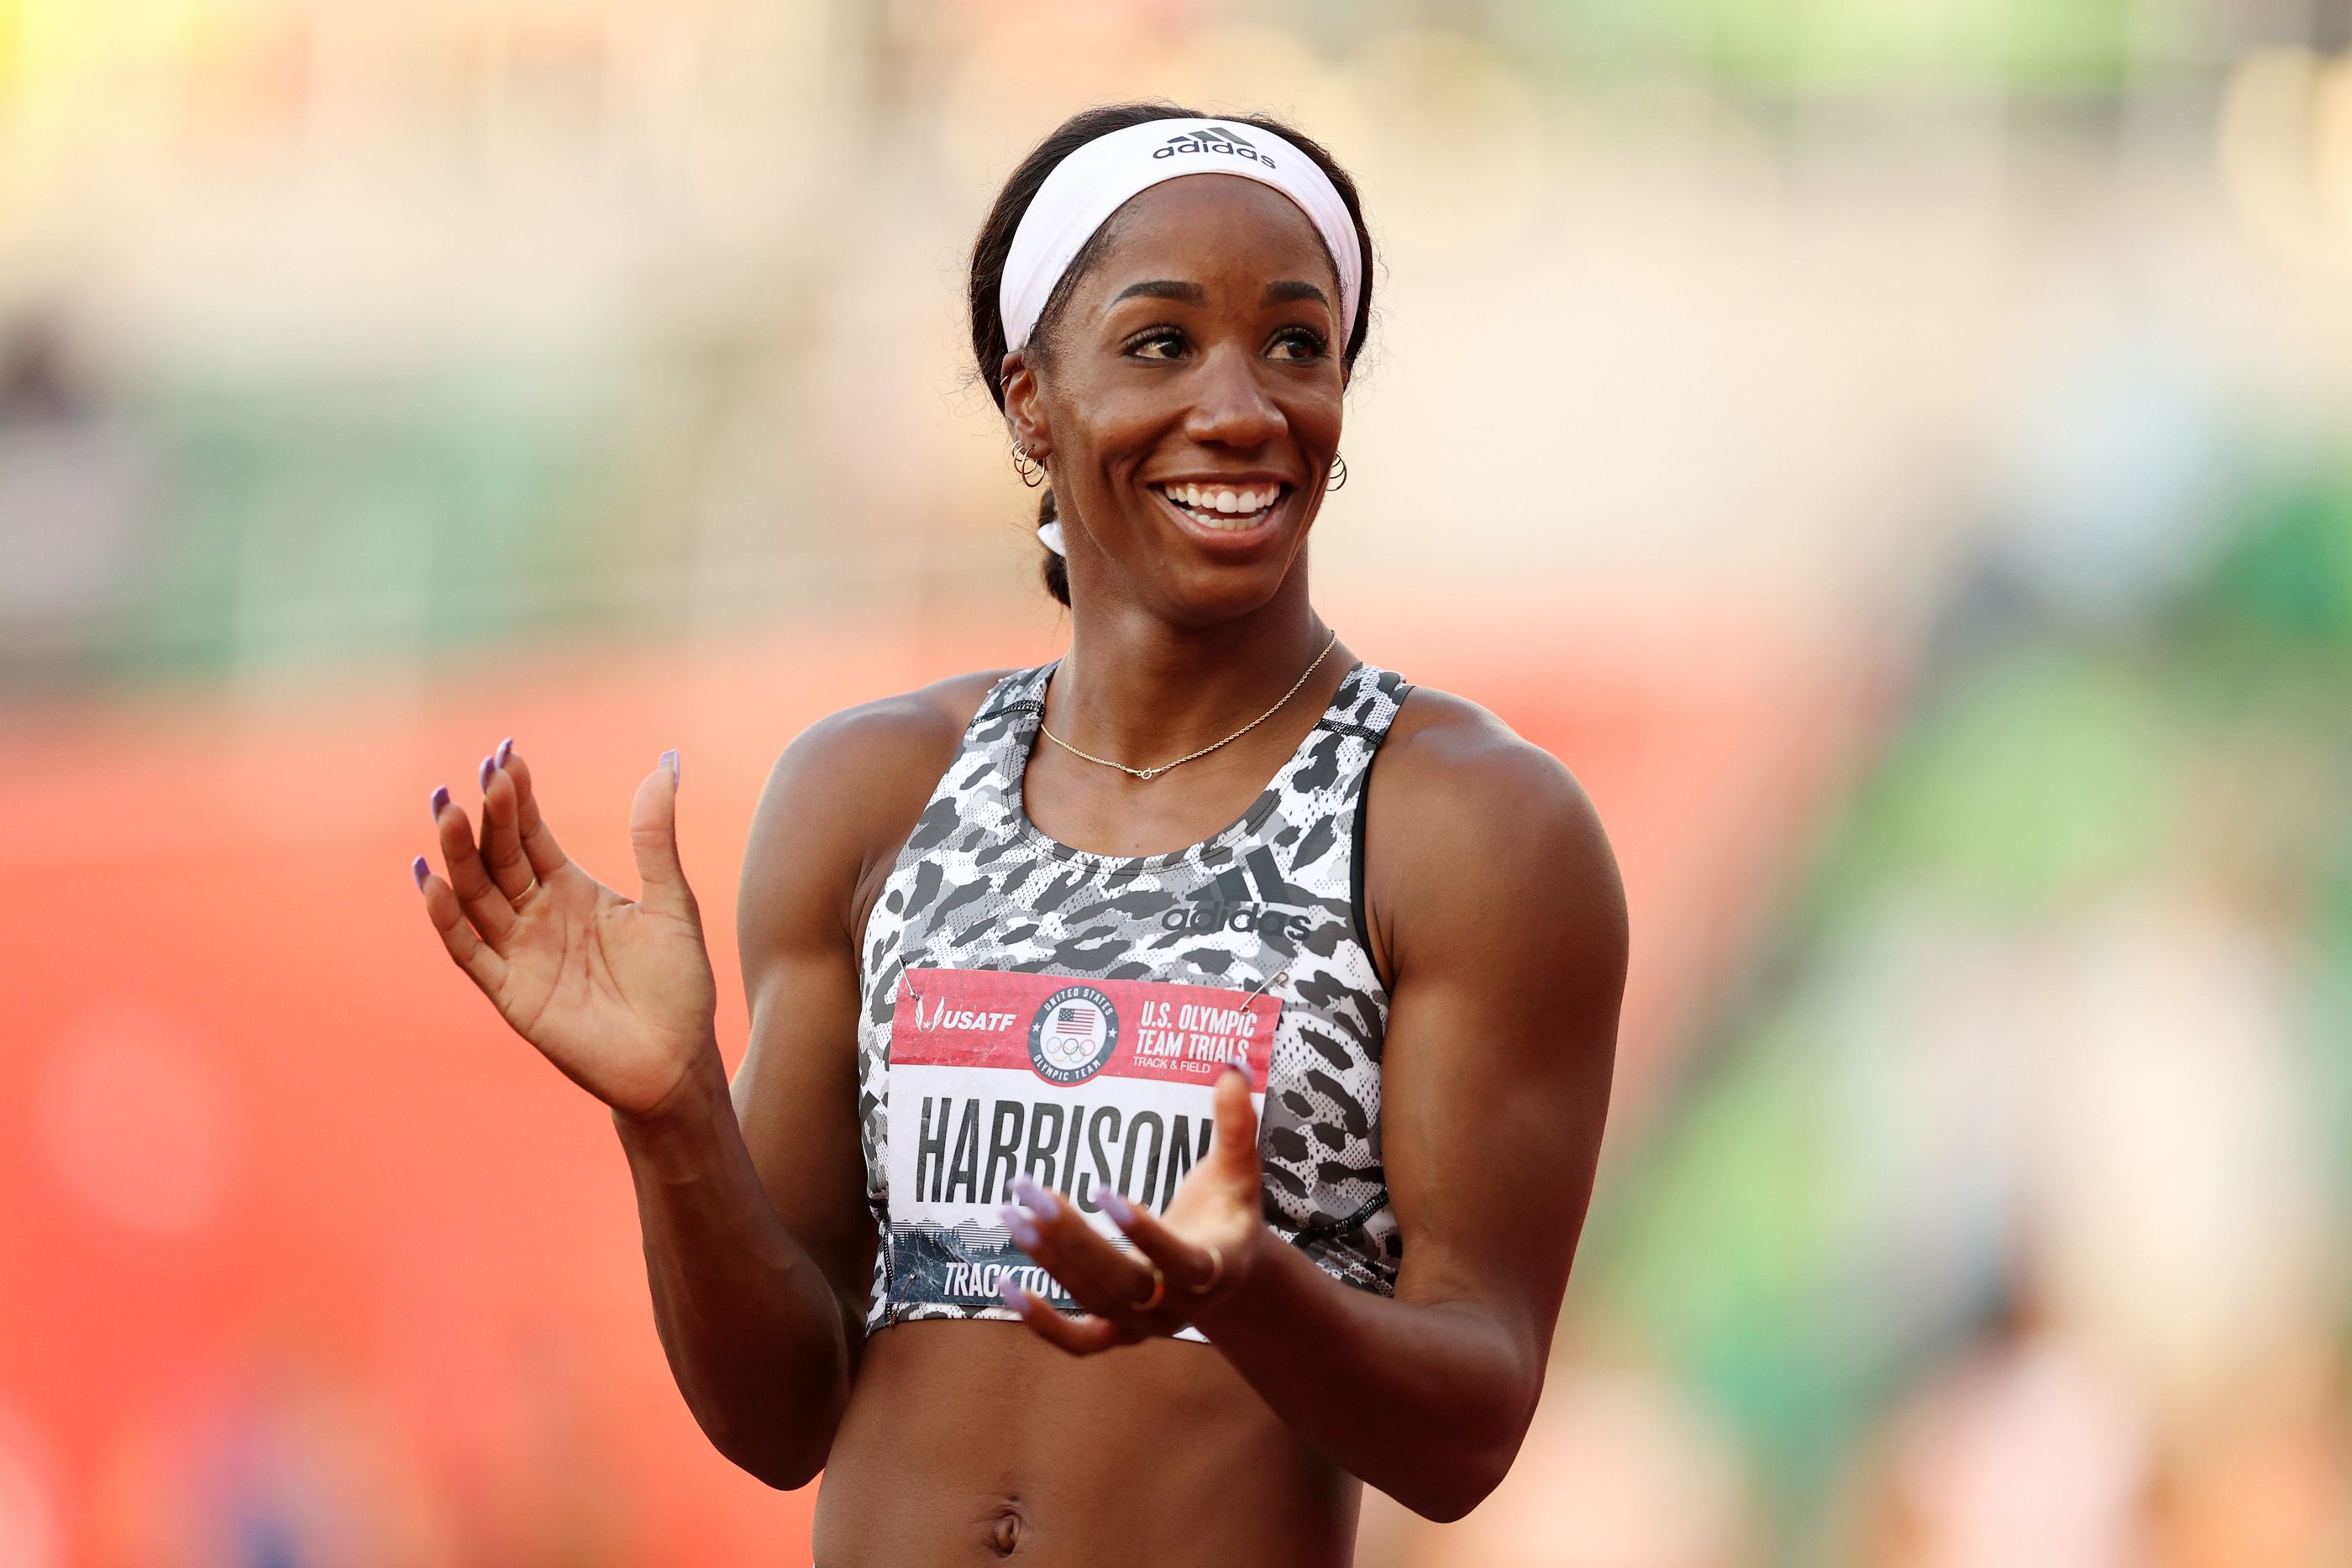 Kendra Harrison after winning the 100m hurdles at the US Trials